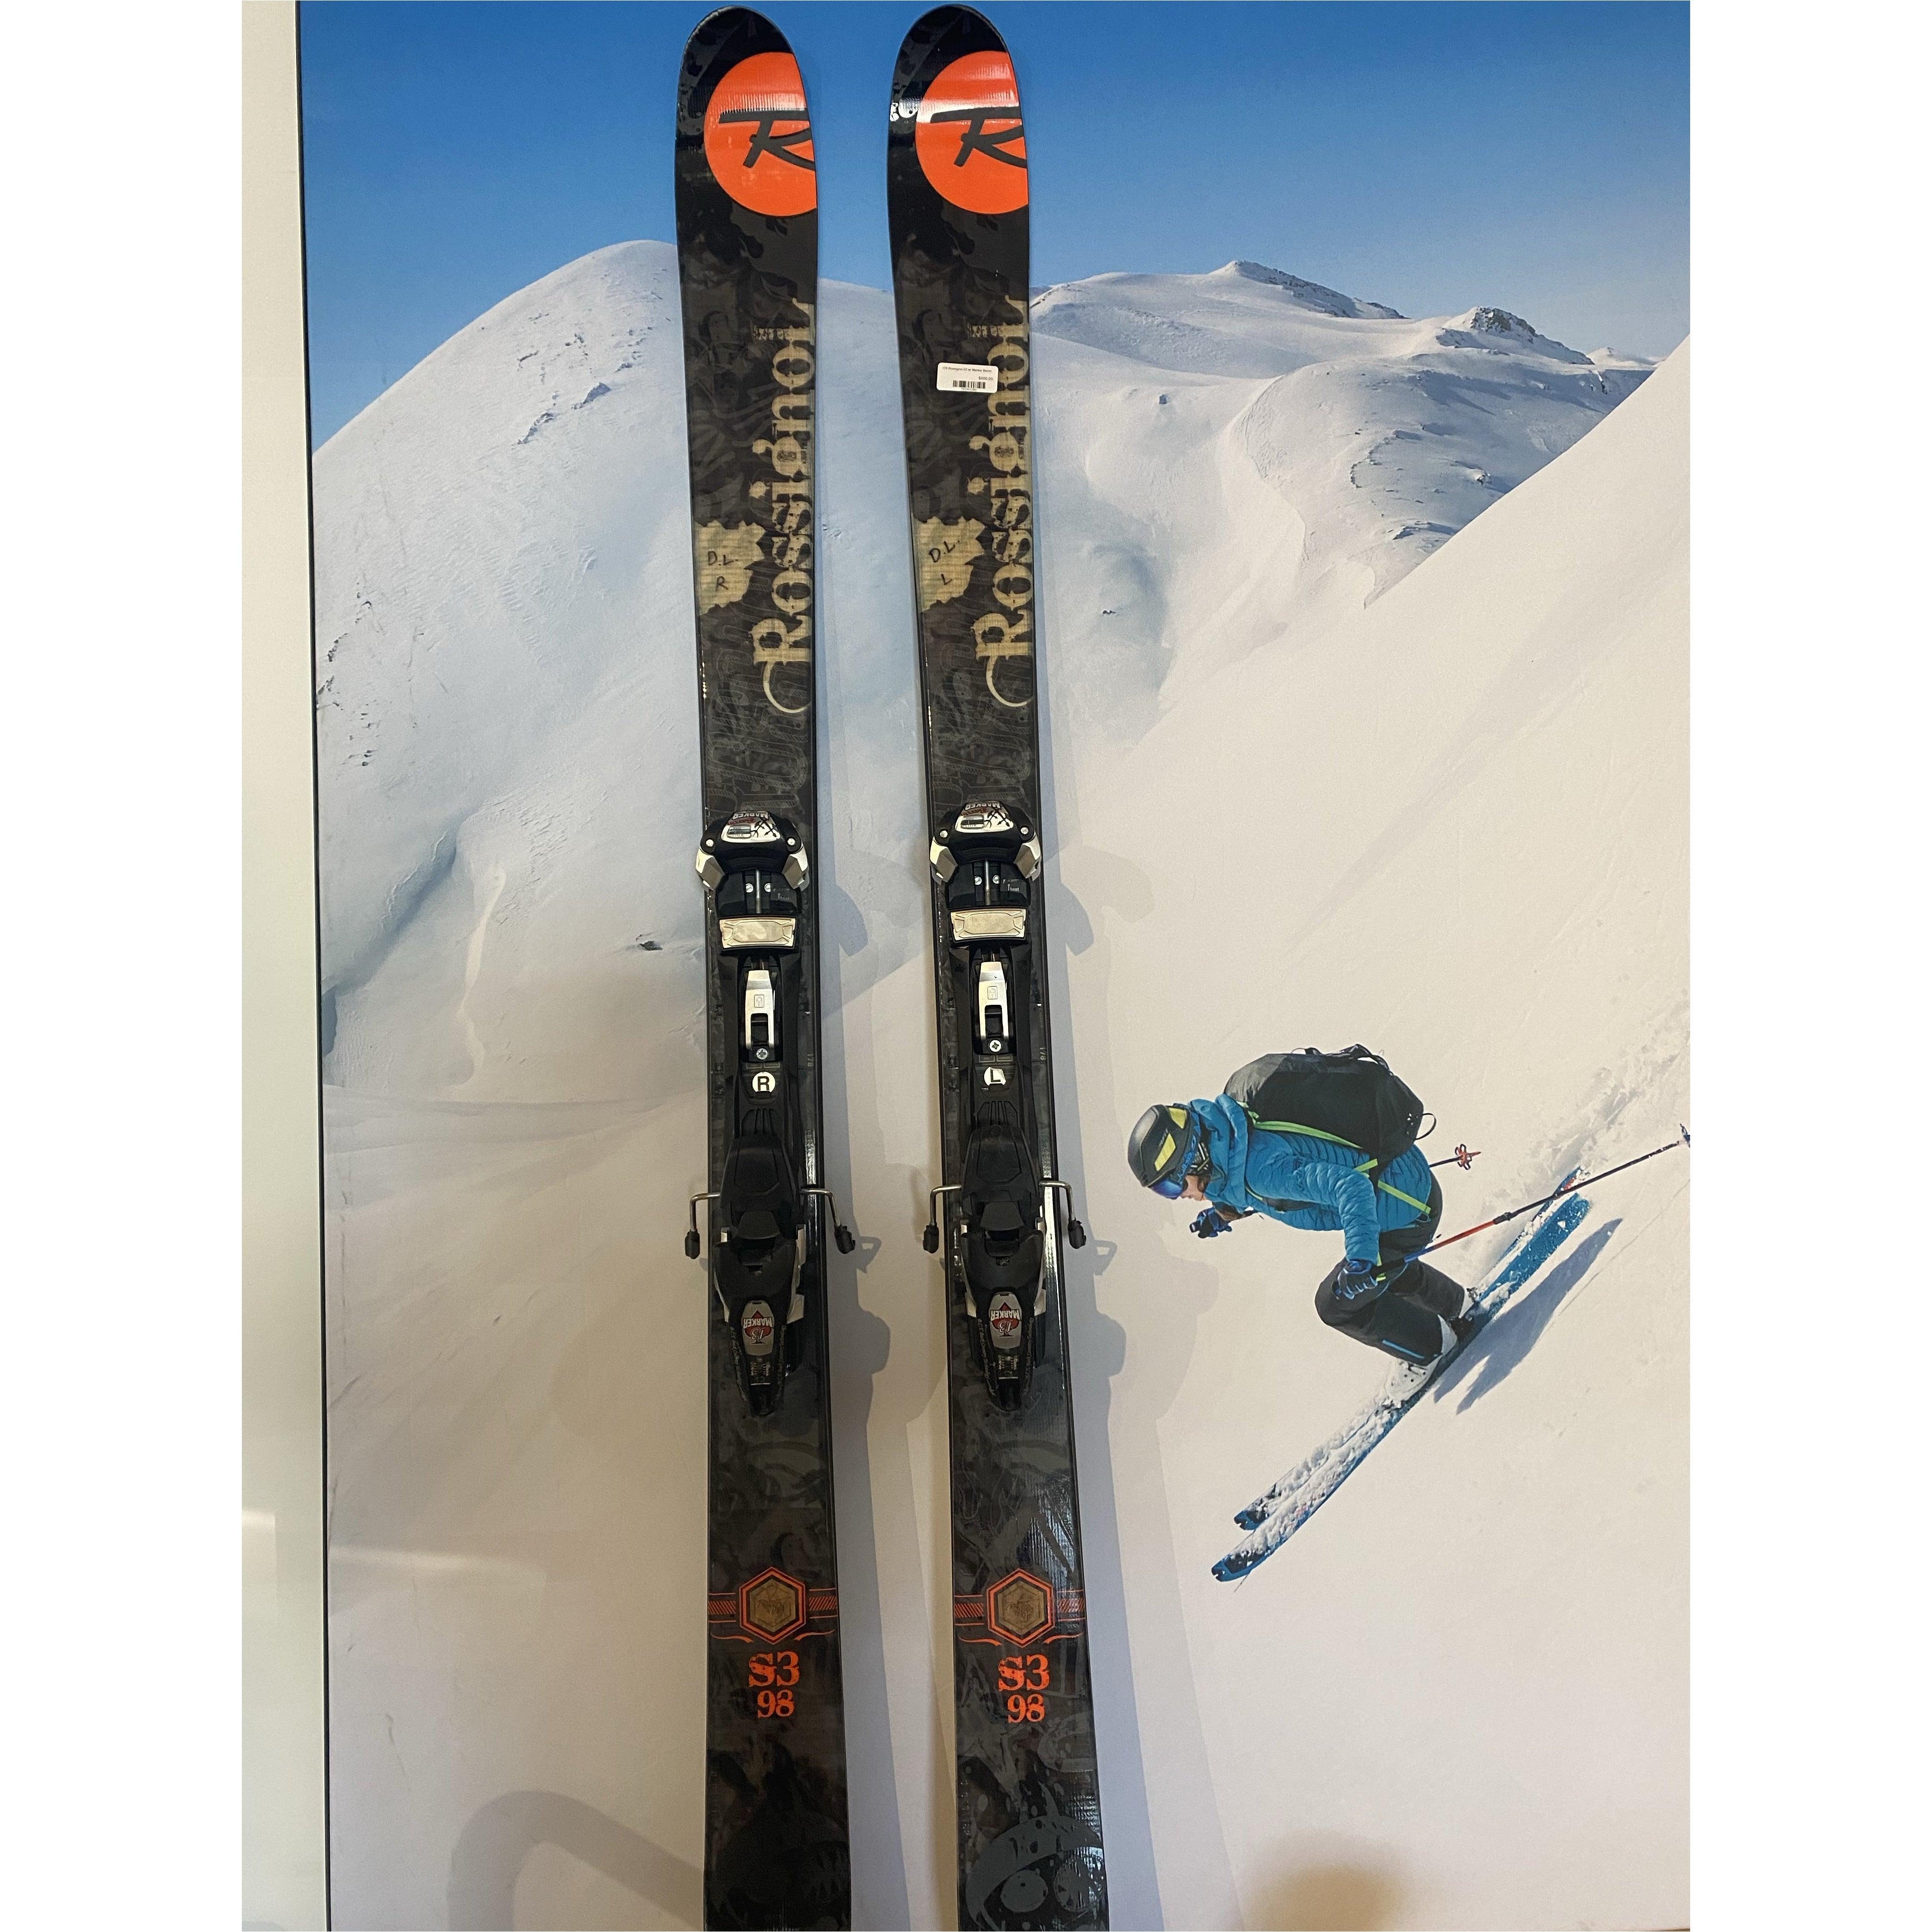 Used 178 Rossignol S3 w/ Marker Baron Bindings and Crampons